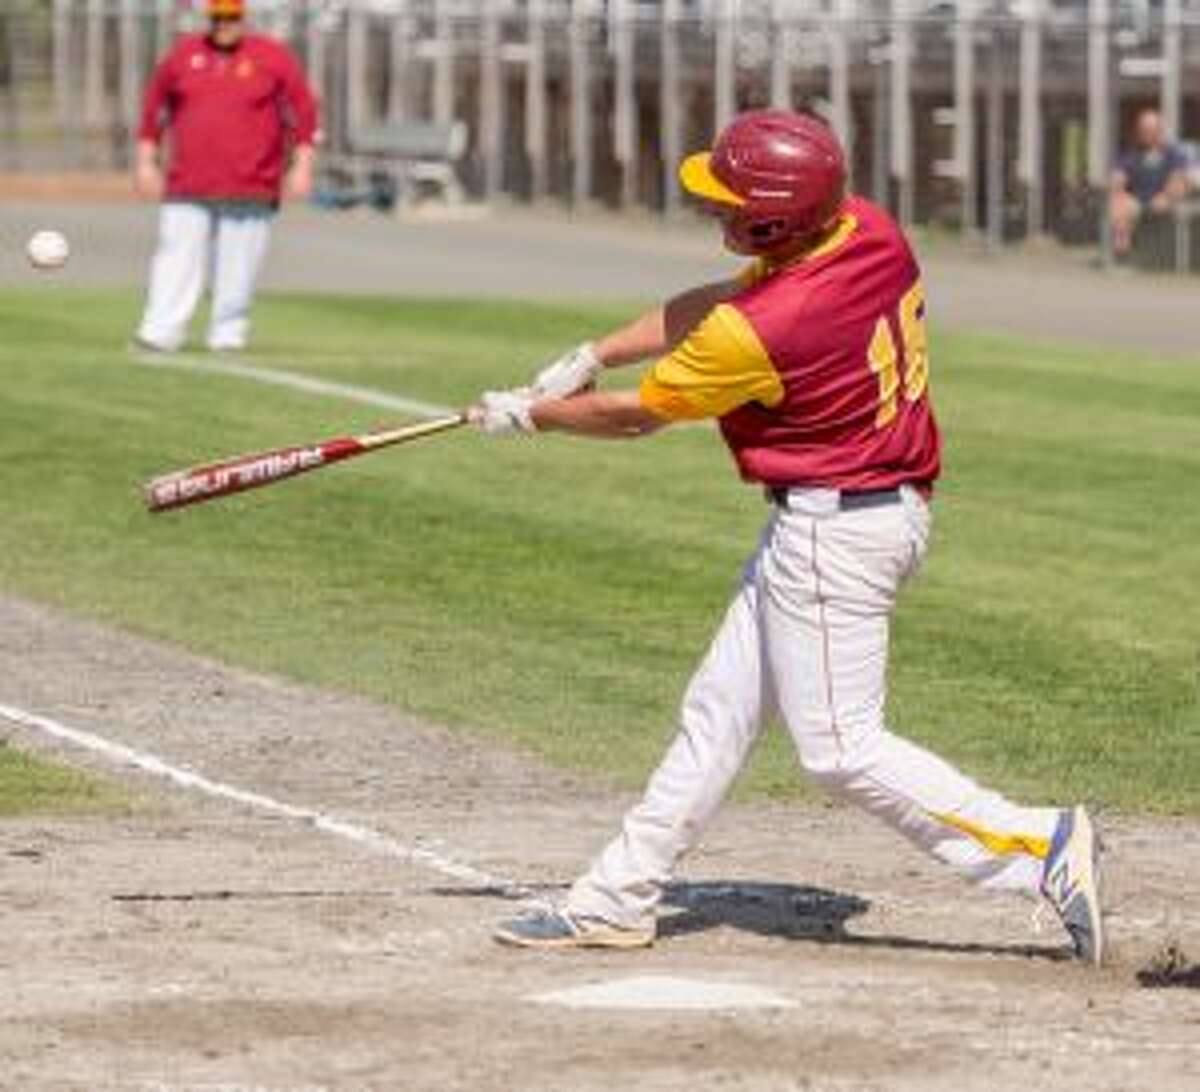 Jimmy Evans had an RBI double for the Cadets in the semifinals. — David G. Whitham photo